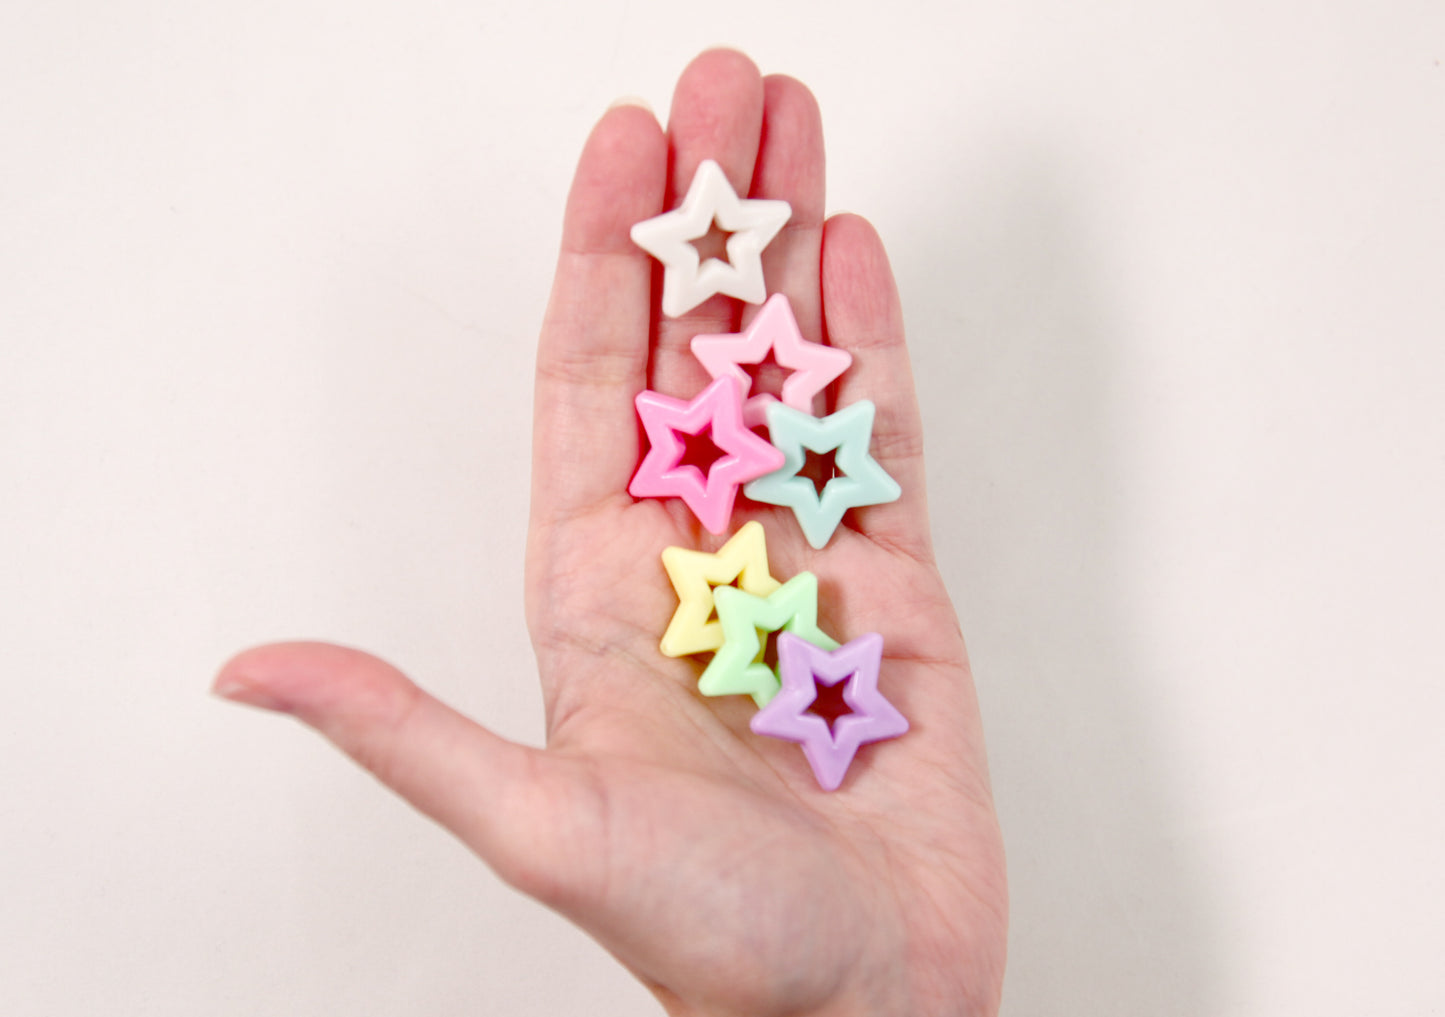 27mm Beautiful Bright Big Pastel Outline Star Chunky Acrylic or Resin Beads - 25 pcs set